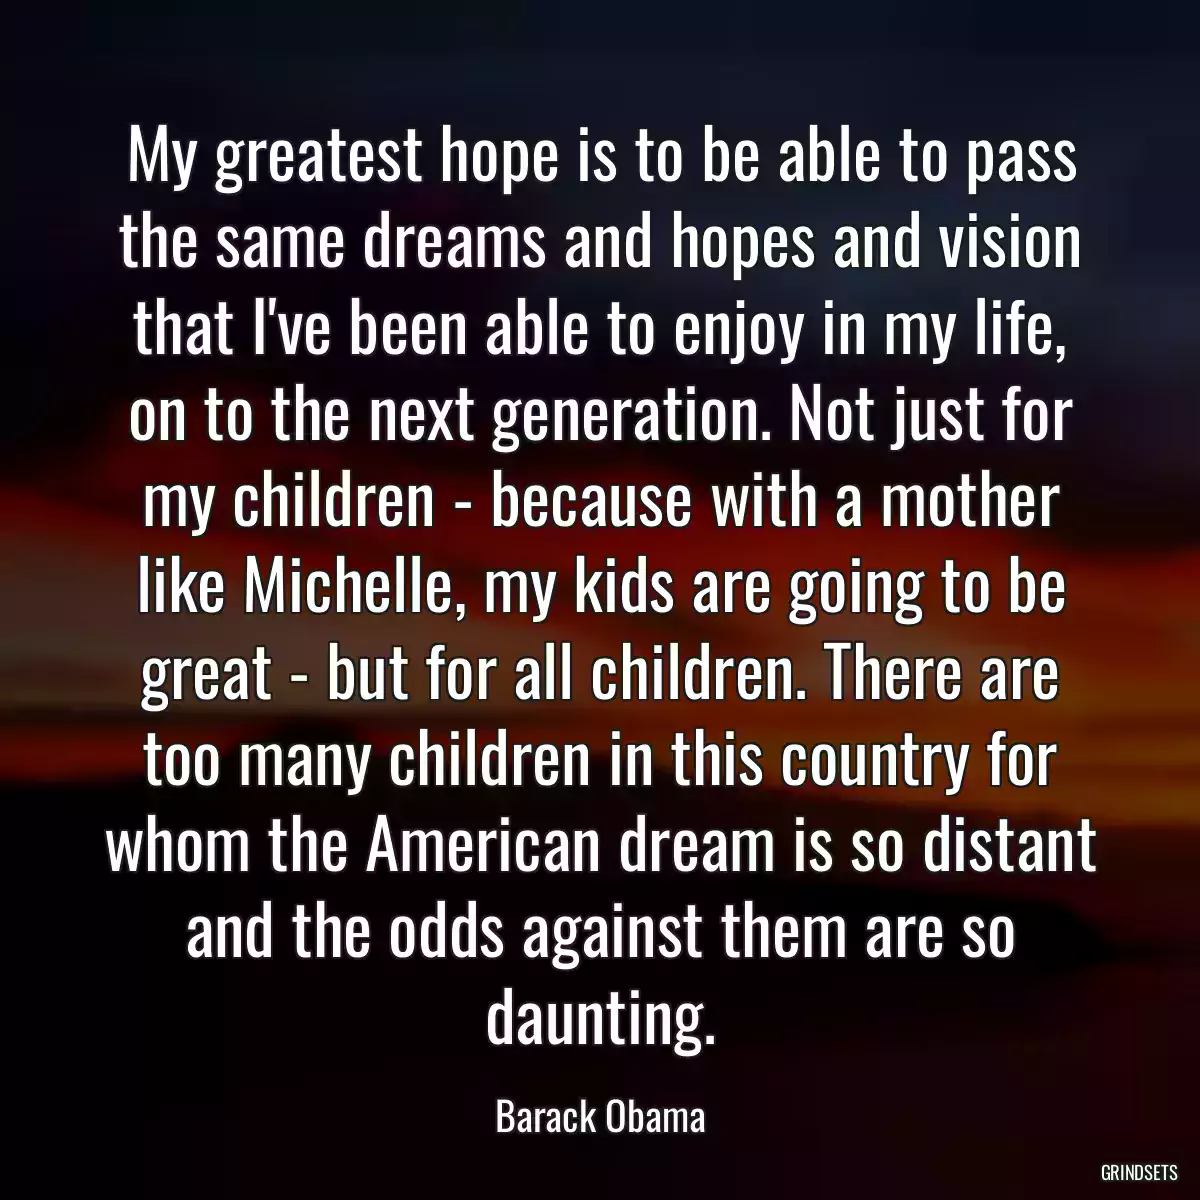 My greatest hope is to be able to pass the same dreams and hopes and vision that I\'ve been able to enjoy in my life, on to the next generation. Not just for my children - because with a mother like Michelle, my kids are going to be great - but for all children. There are too many children in this country for whom the American dream is so distant and the odds against them are so daunting.